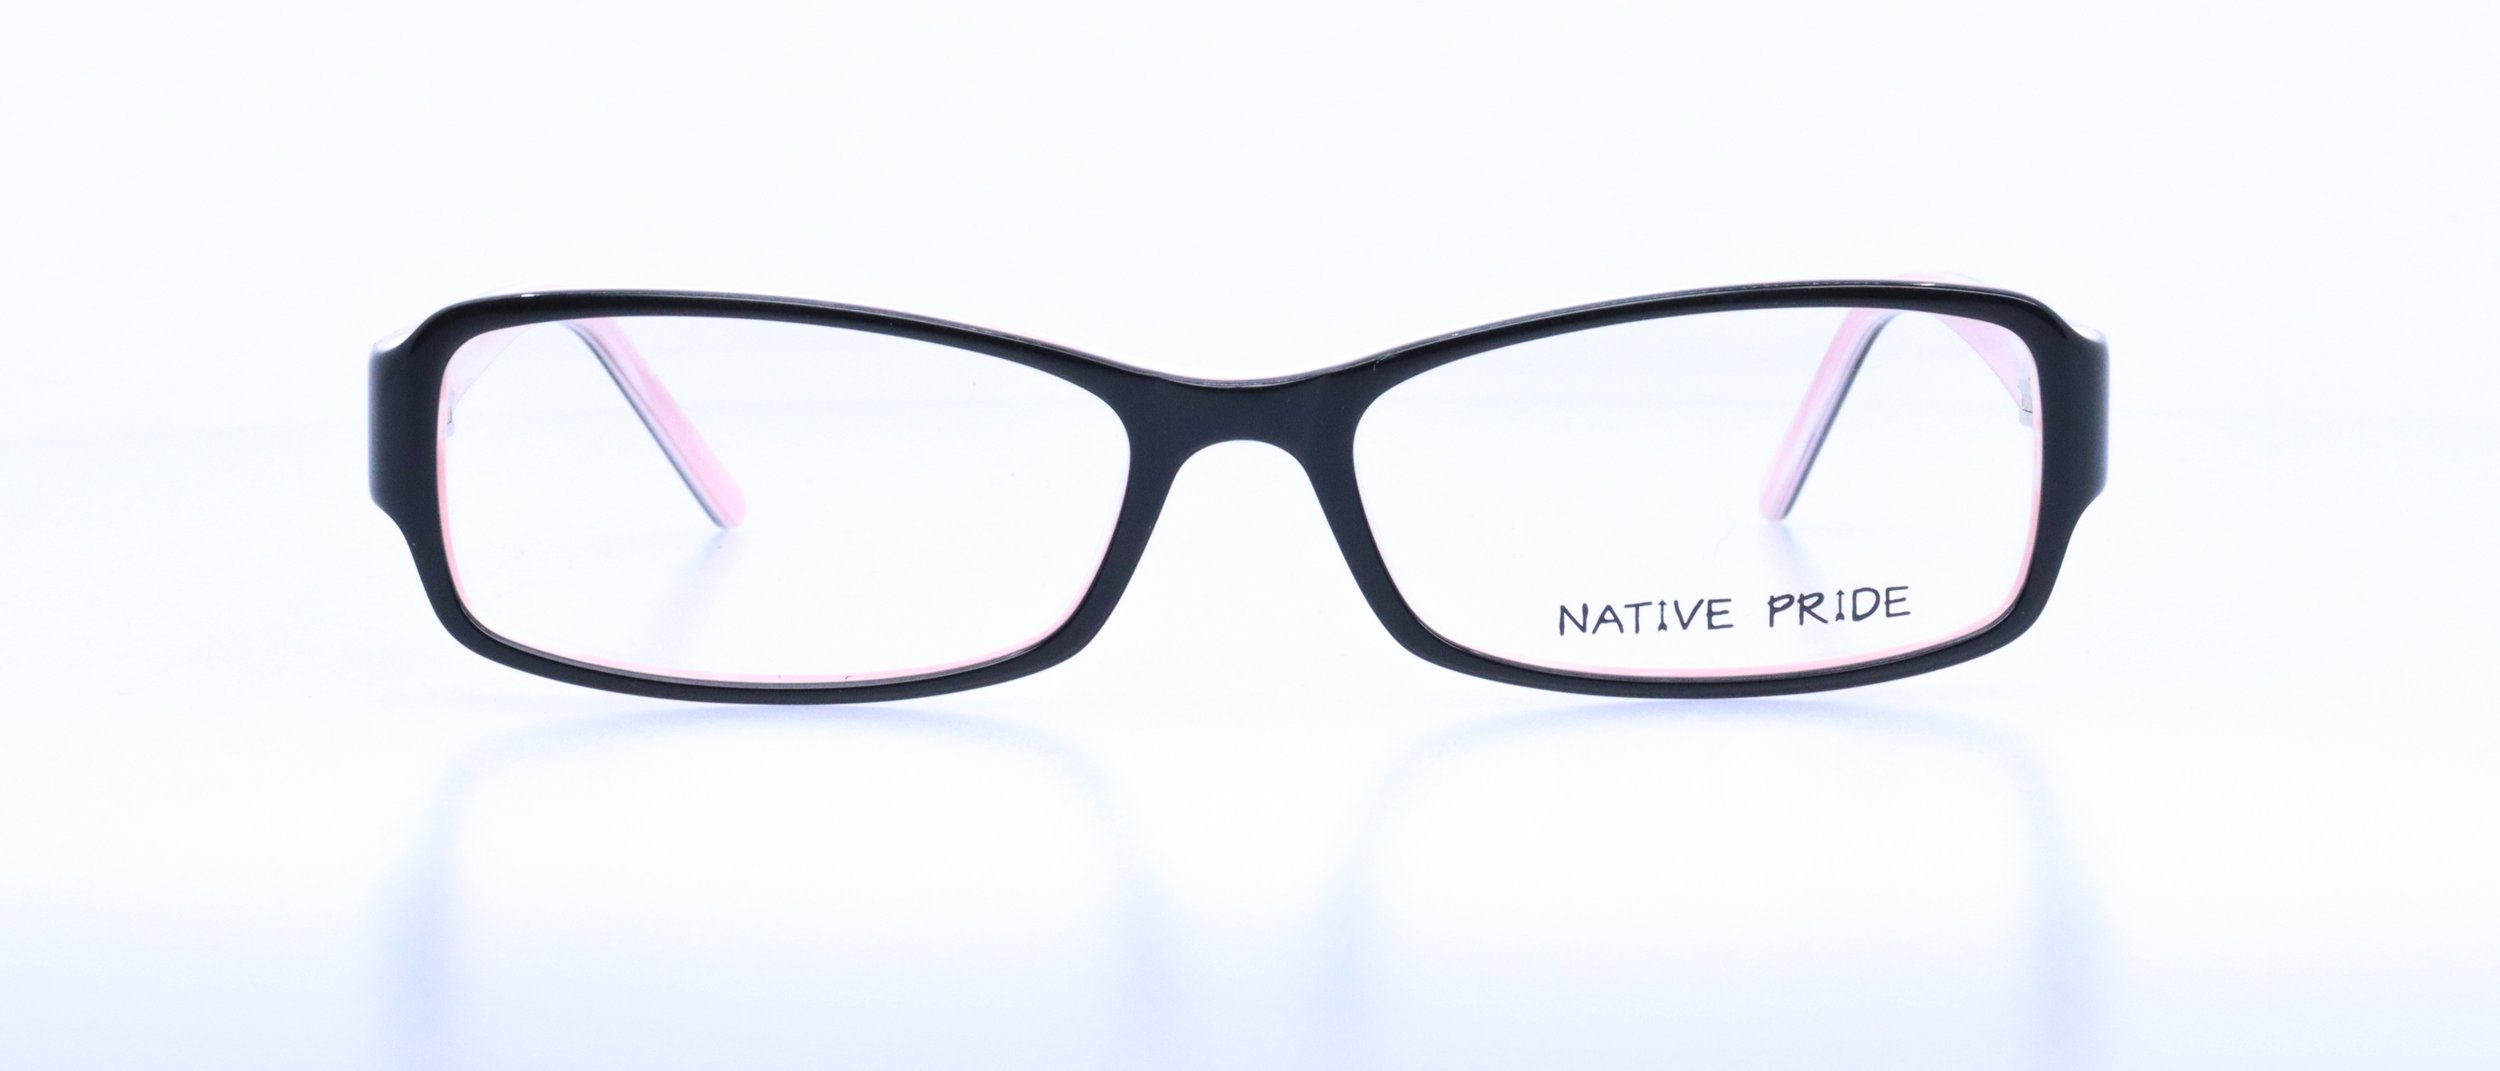  Dragonfly: 56-17-140, Available in Purple Fade, Black/Pink, or Tortoise/Blue 